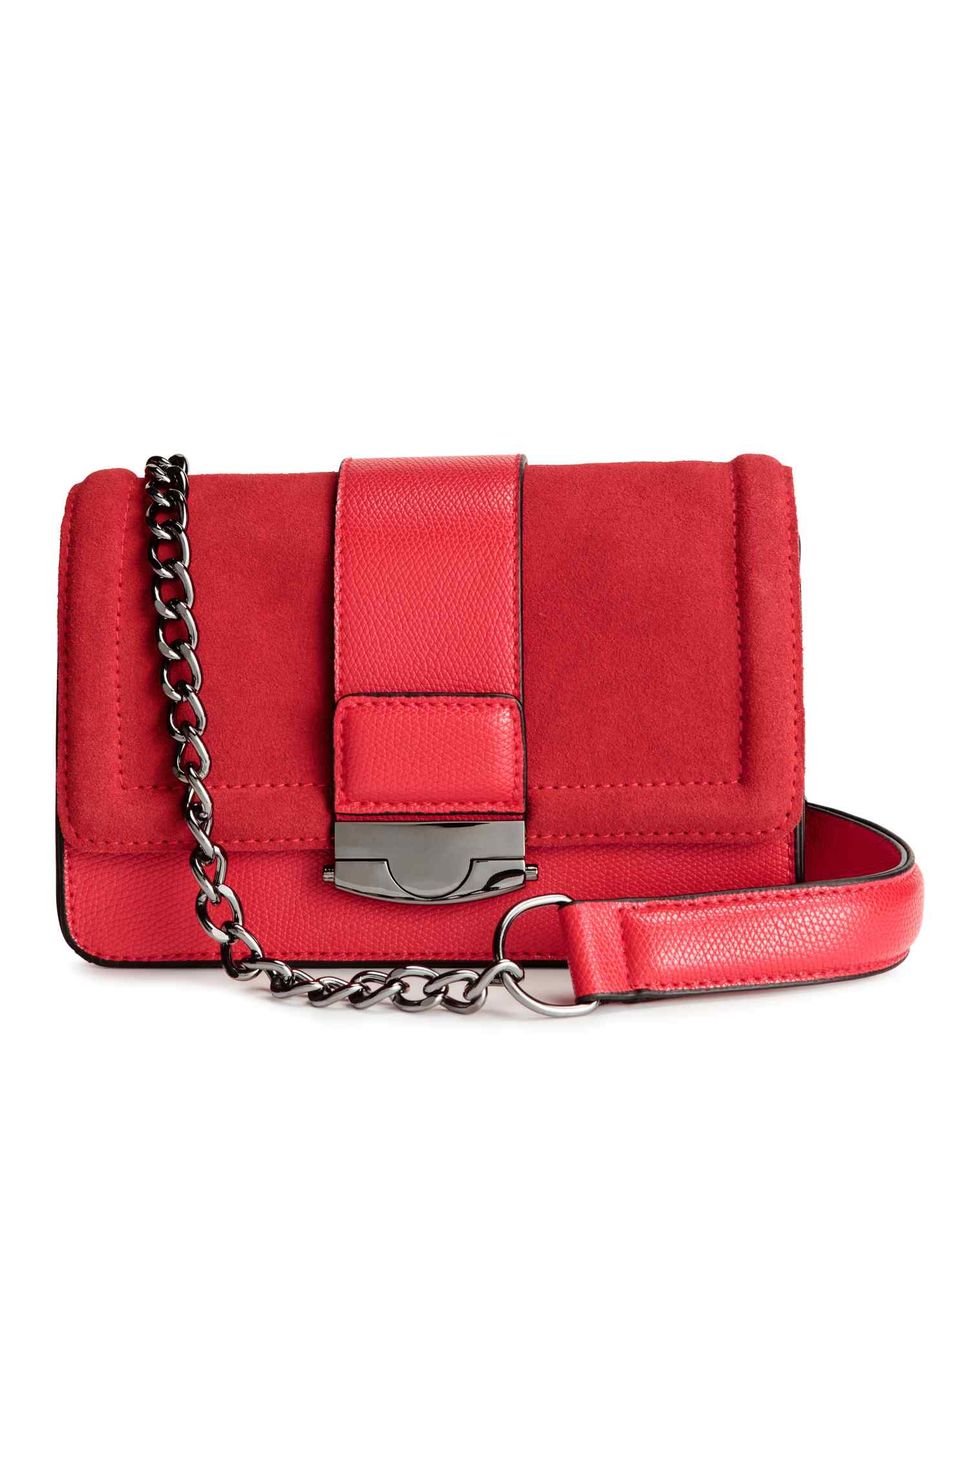 <p>If you want to wear this bag all day and night, simply tuck the strap inside to transform the crossbody bag into a clutch.</p><p><a href="http://www2.hm.com/en_gb/productpage.0387451001.html#" target="_blank">Bag with suede details, £29.99, H&amp;M</a></p>